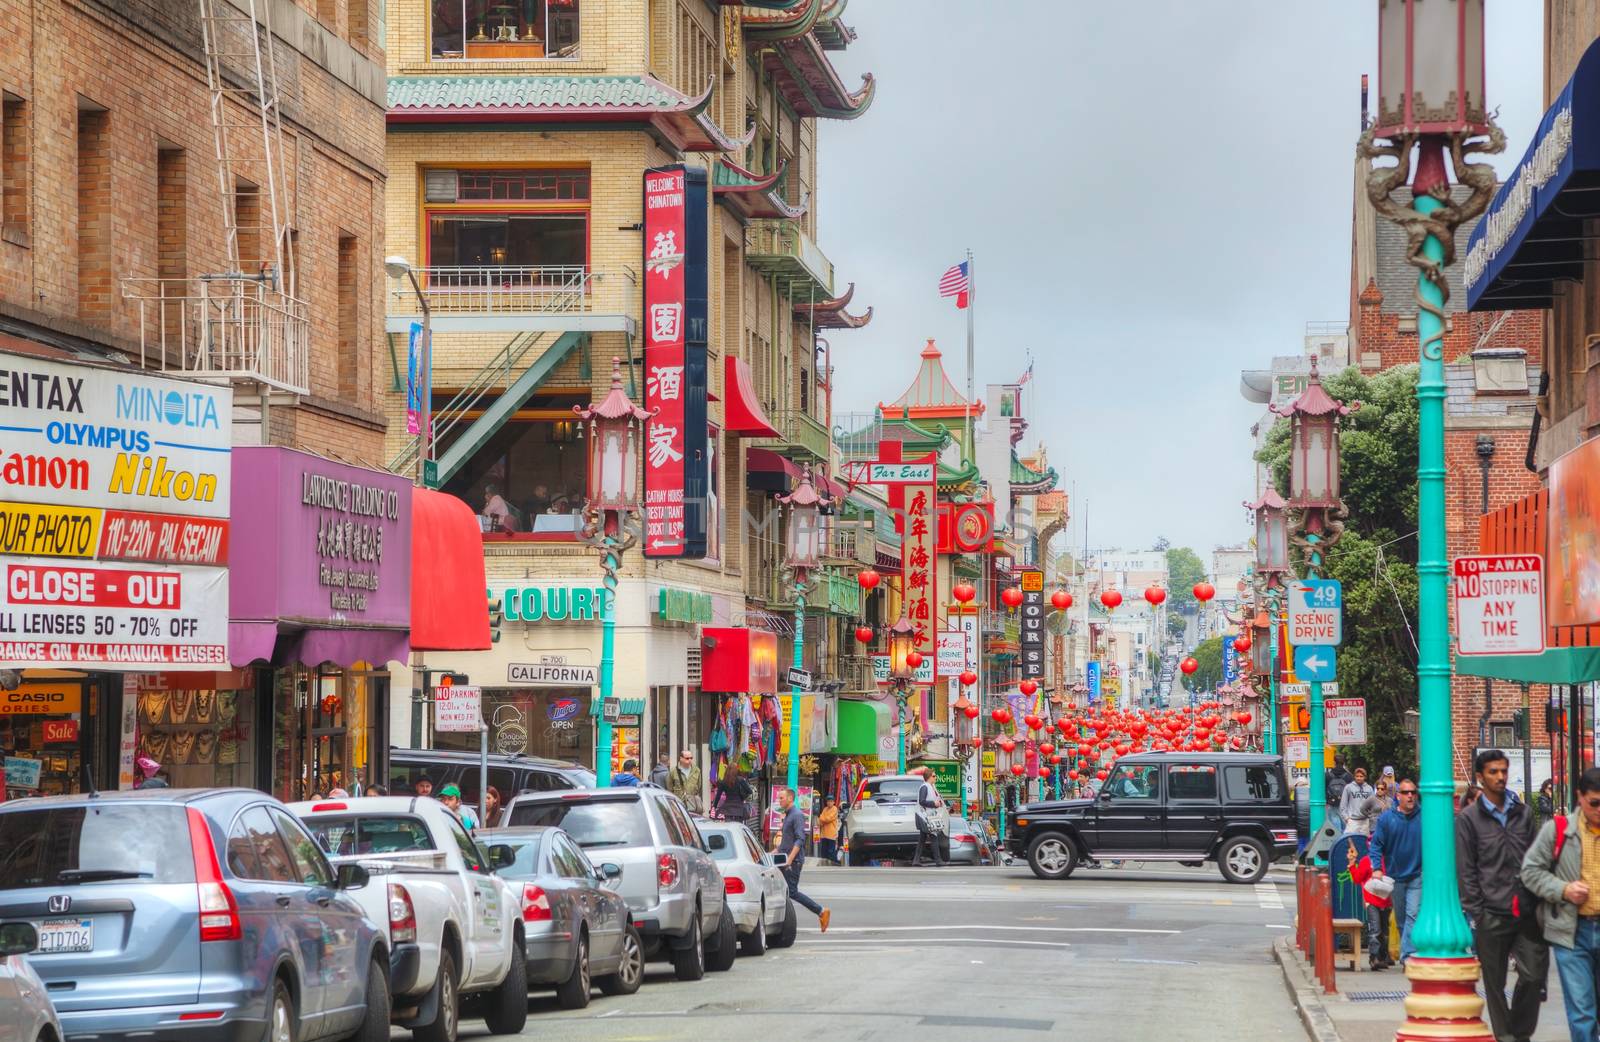 China town main street in San Francisco by AndreyKr